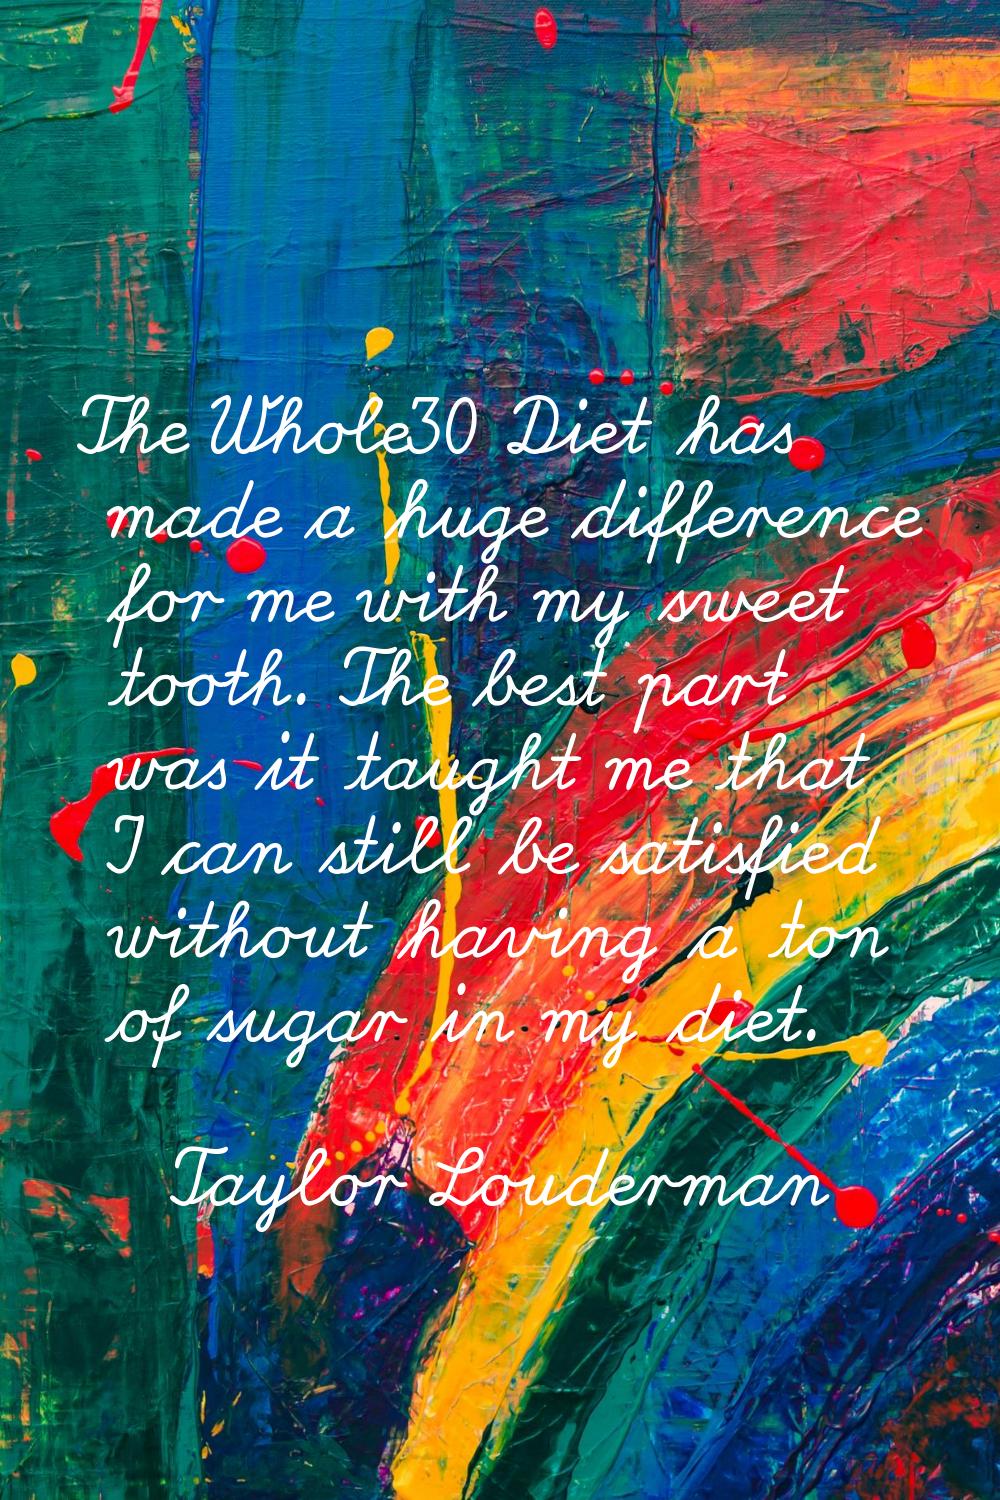 The Whole30 Diet has made a huge difference for me with my sweet tooth. The best part was it taught